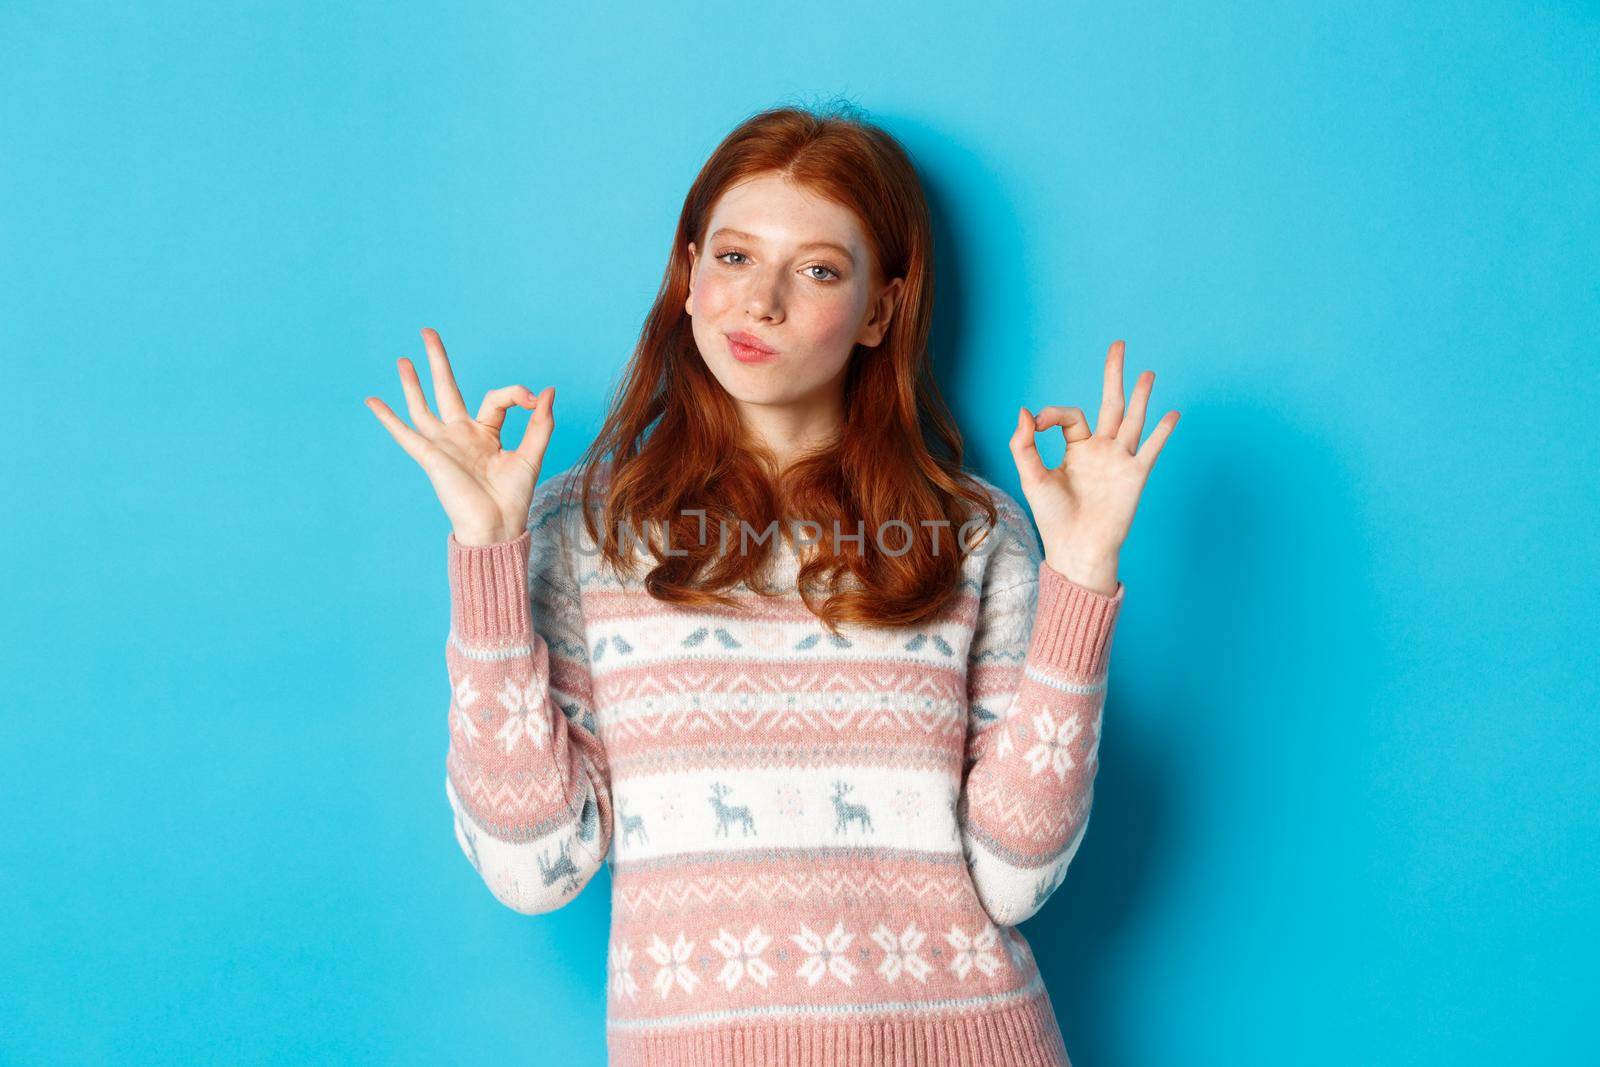 Satisfied and proud redhead girl nod in approval, showing okay sign, not bad or praise gesture, standing against blue background.